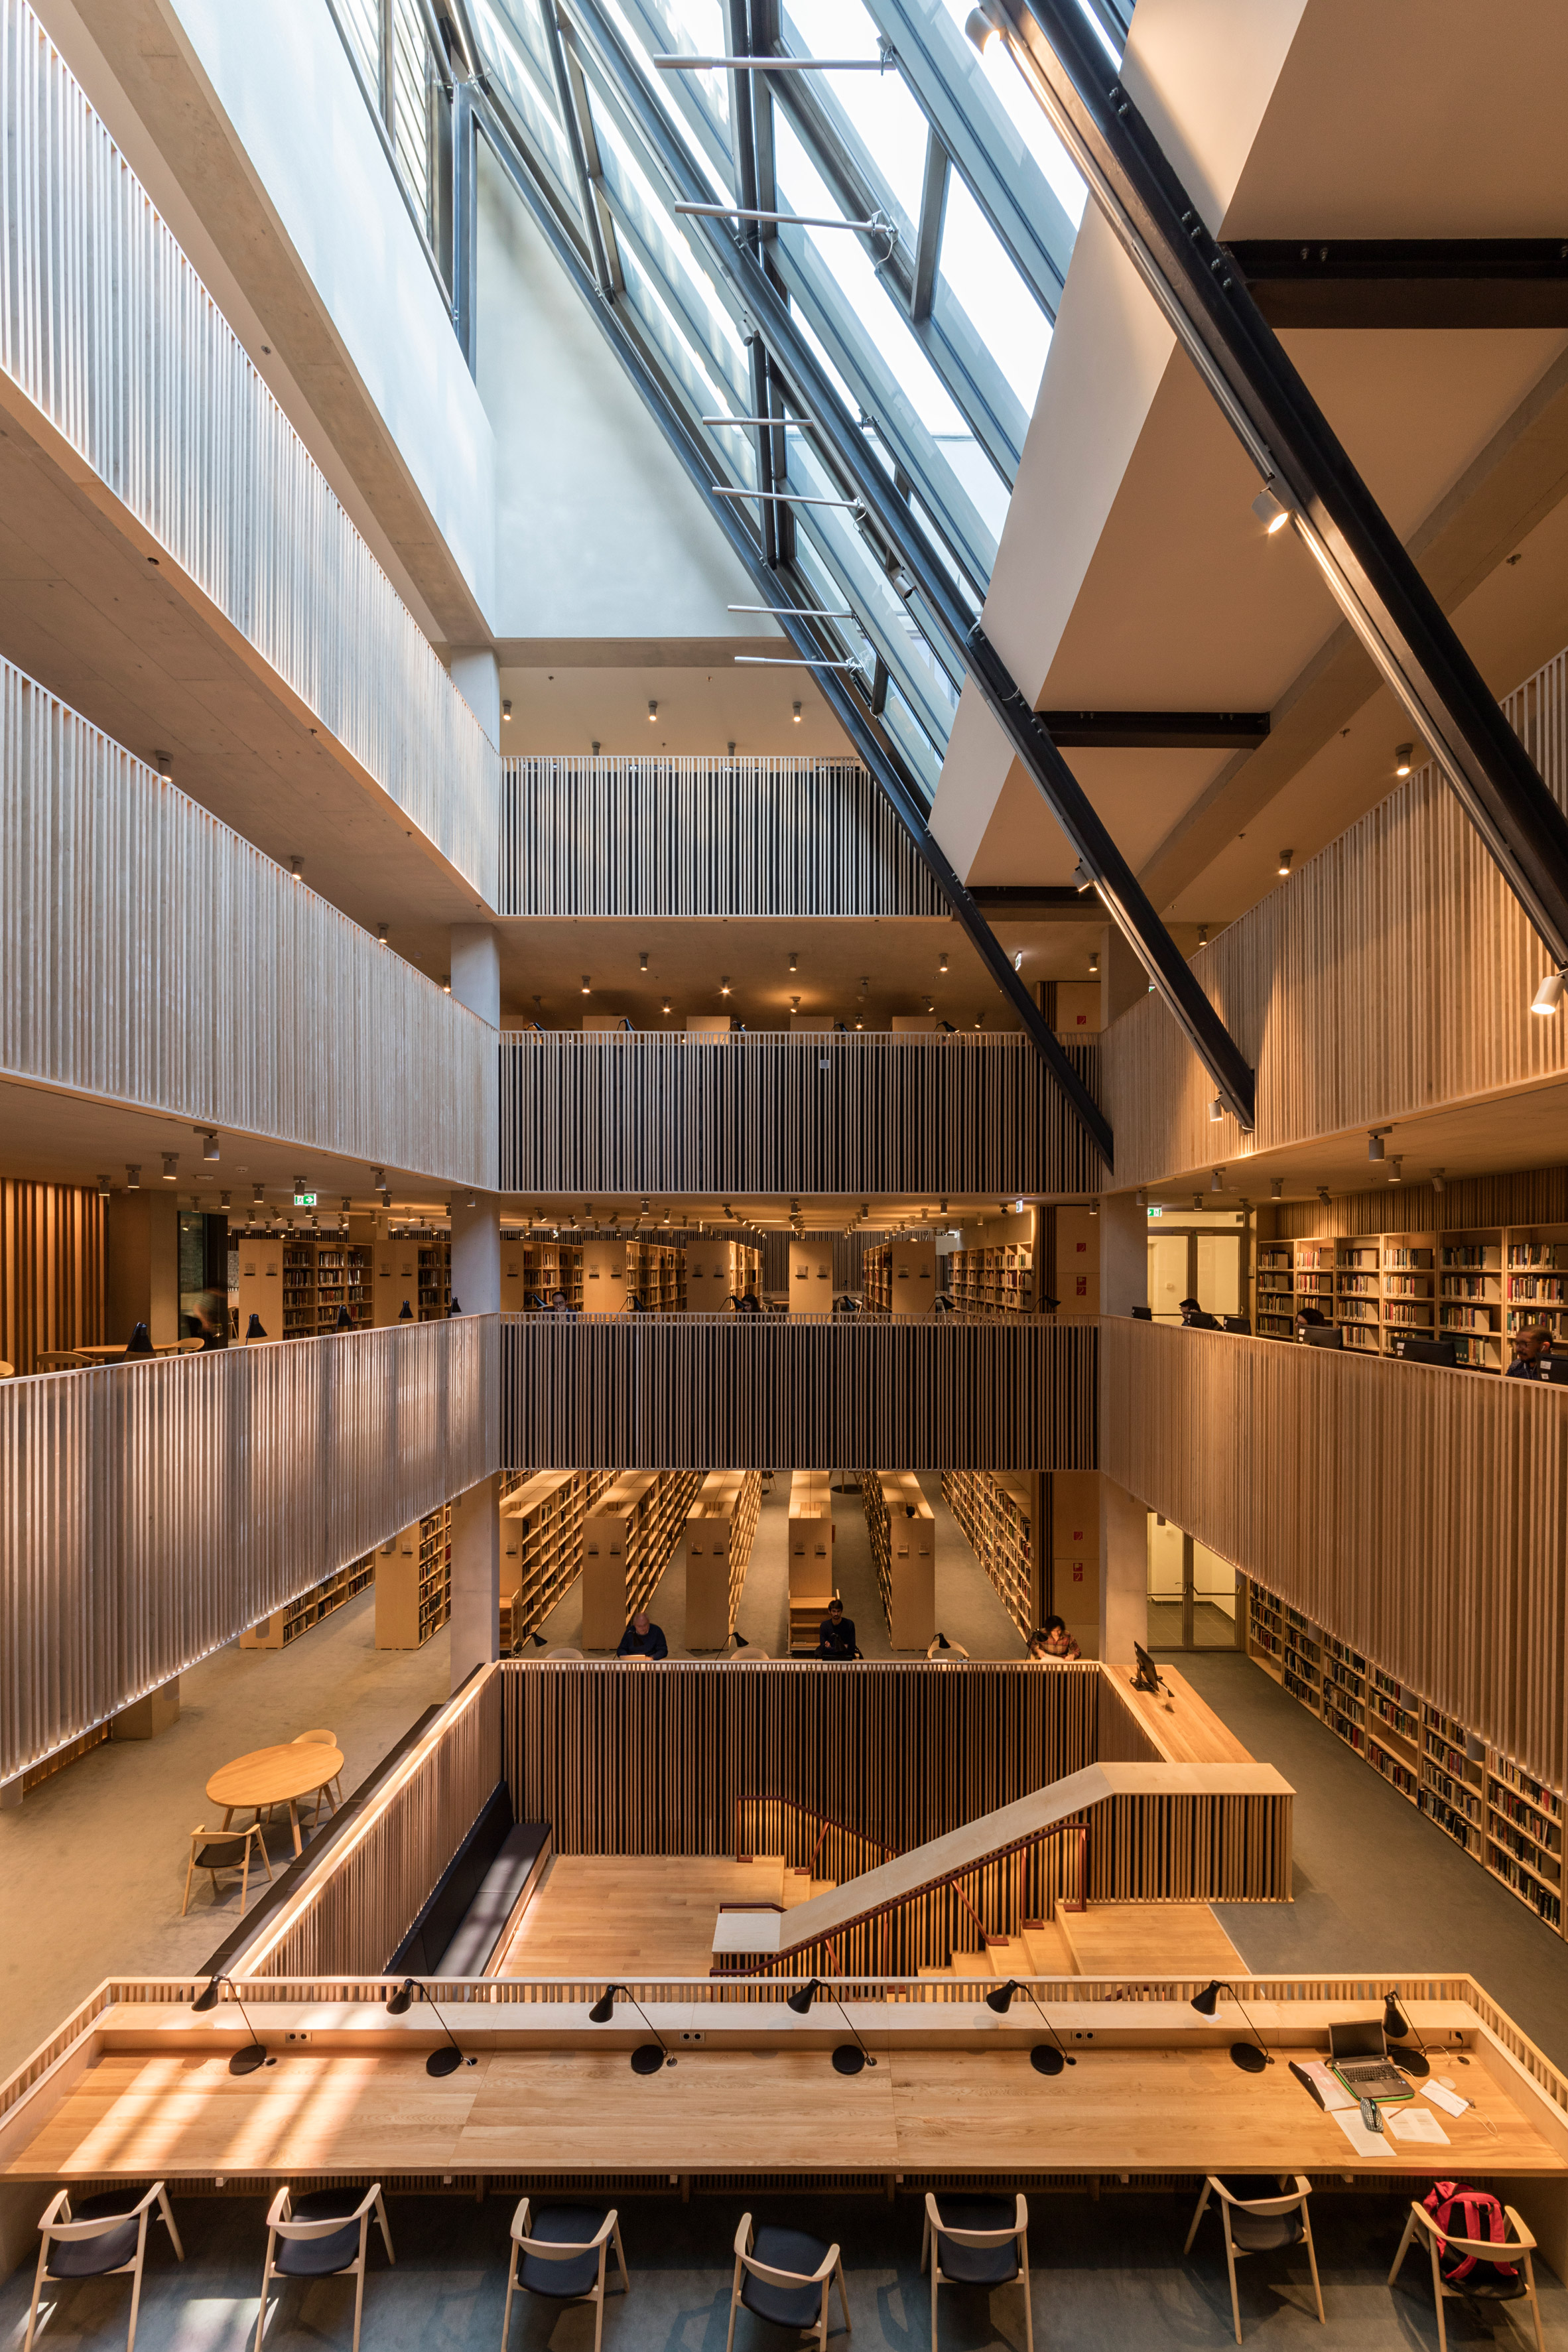 Woman Architect of the Year 2019: Central European University from the Women in Architecture 2019 Awards won by Sheila O’Donnell and Xu Tiantian